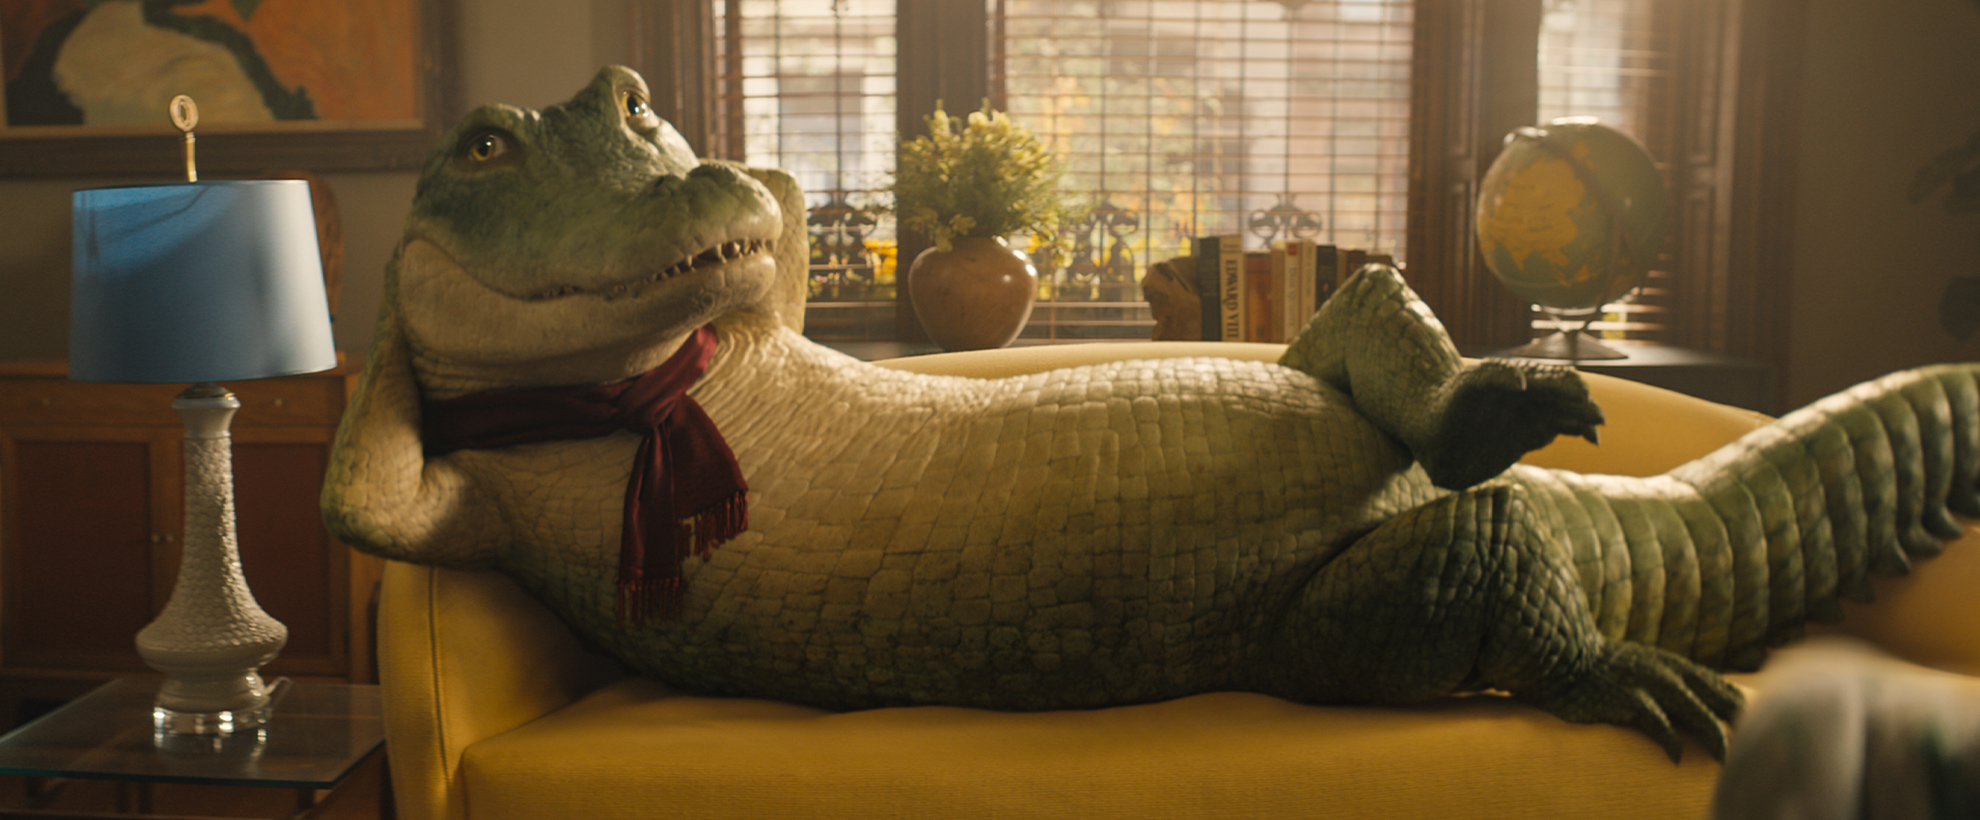 Lyle the crocodile, wearing a scarf, lying on a yellow couch